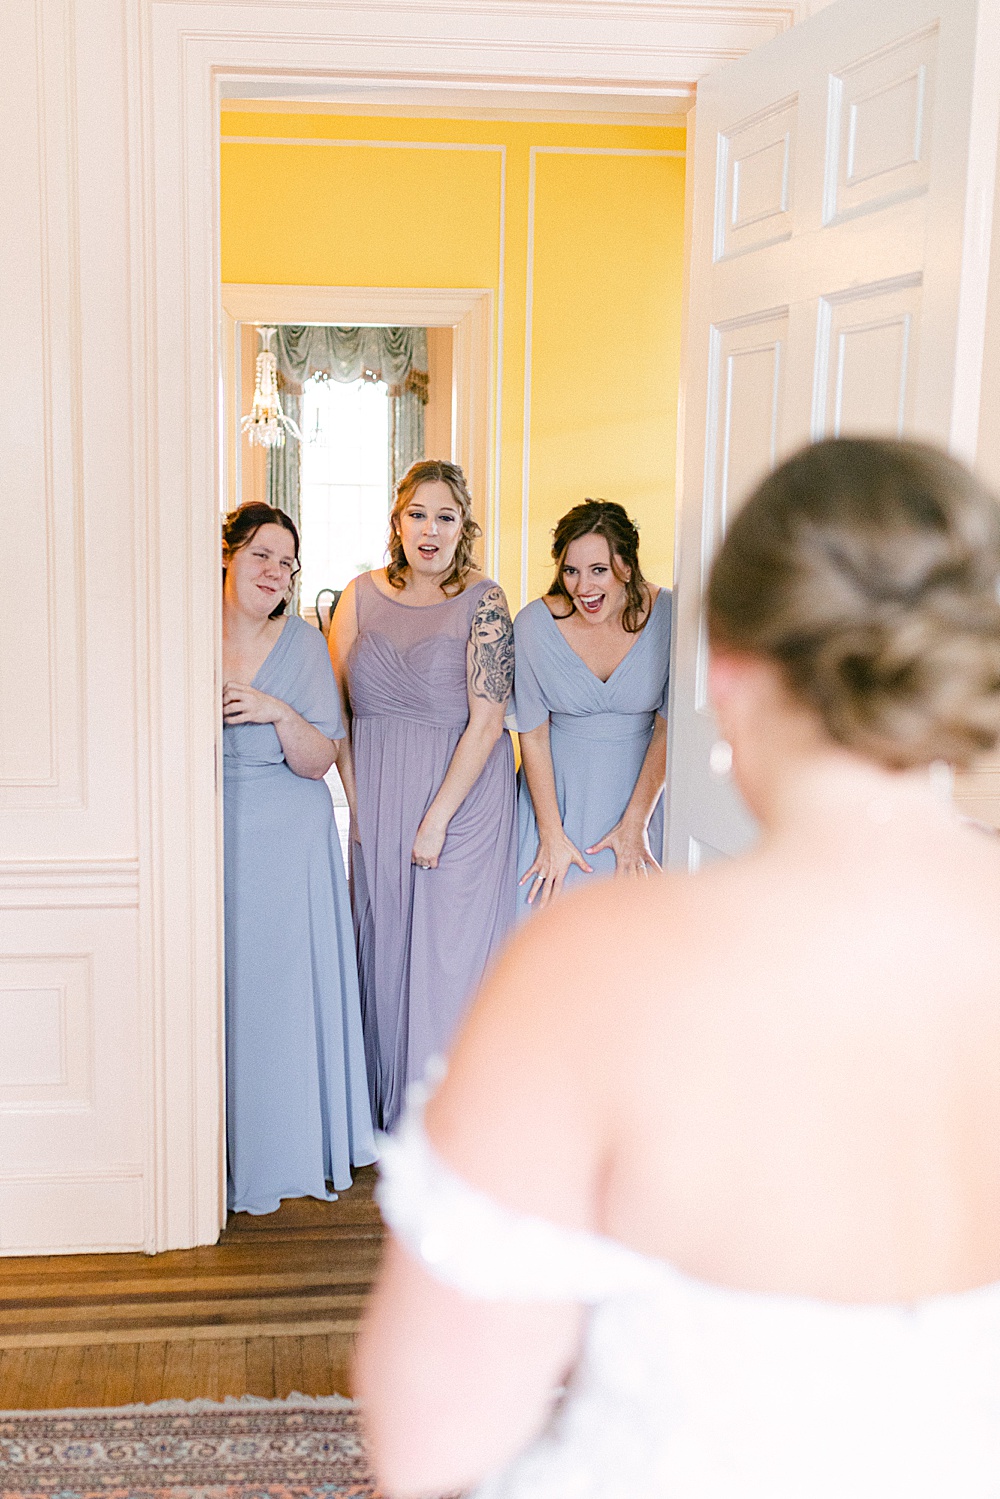 6 Tips For Finding The Perfect Space To Get Ready On Your Wedding Day